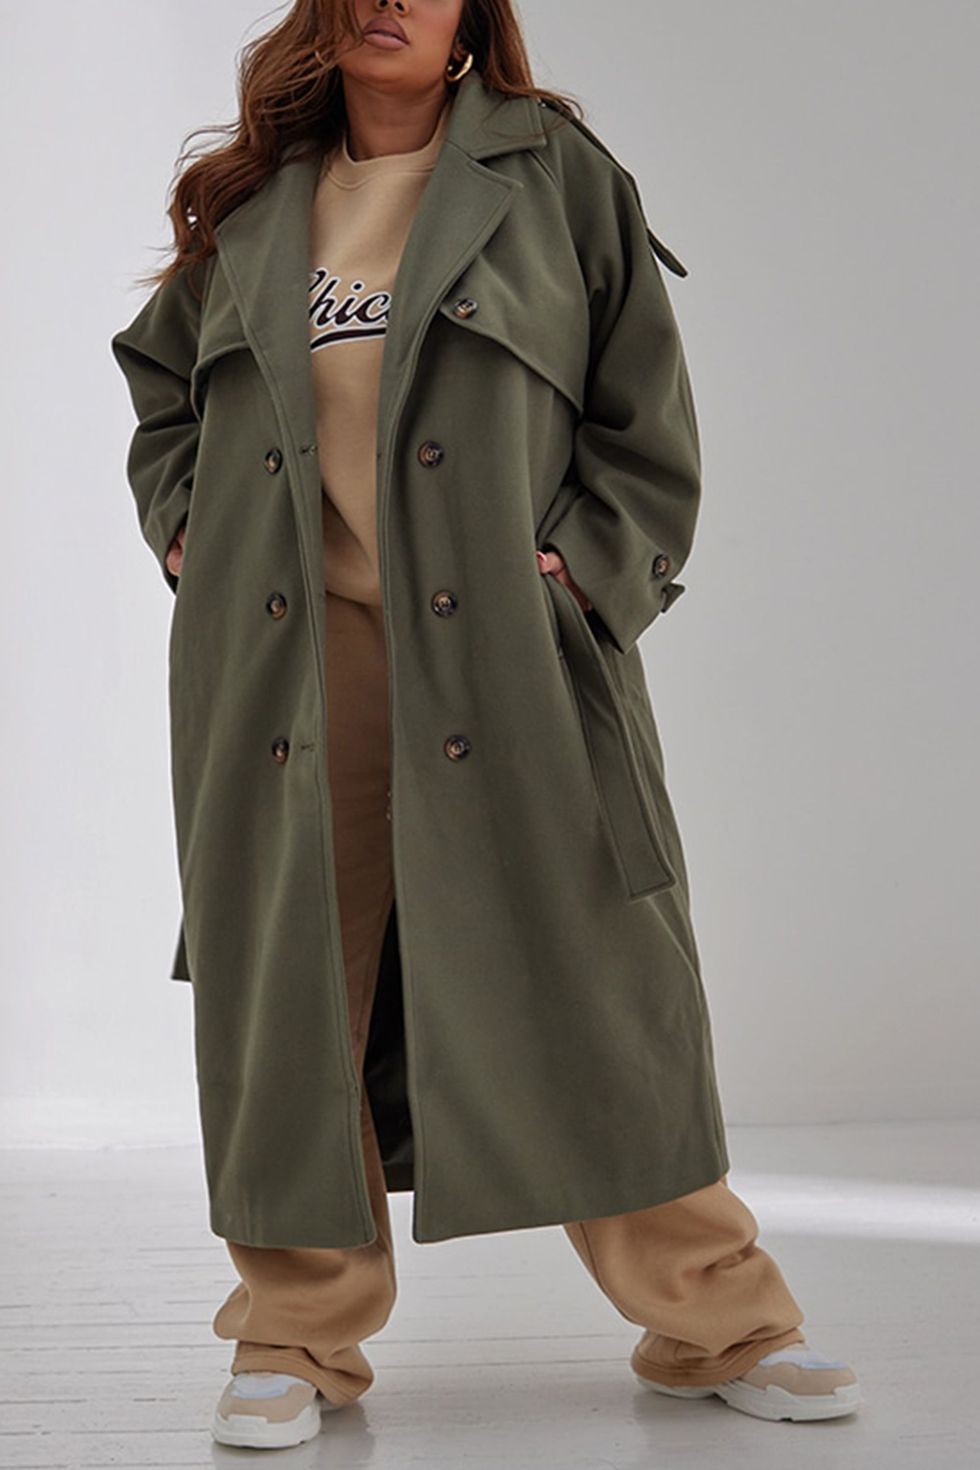 Prettylittlething Women's Green Oversized Double Breasted Military Trim Coat - Size 10